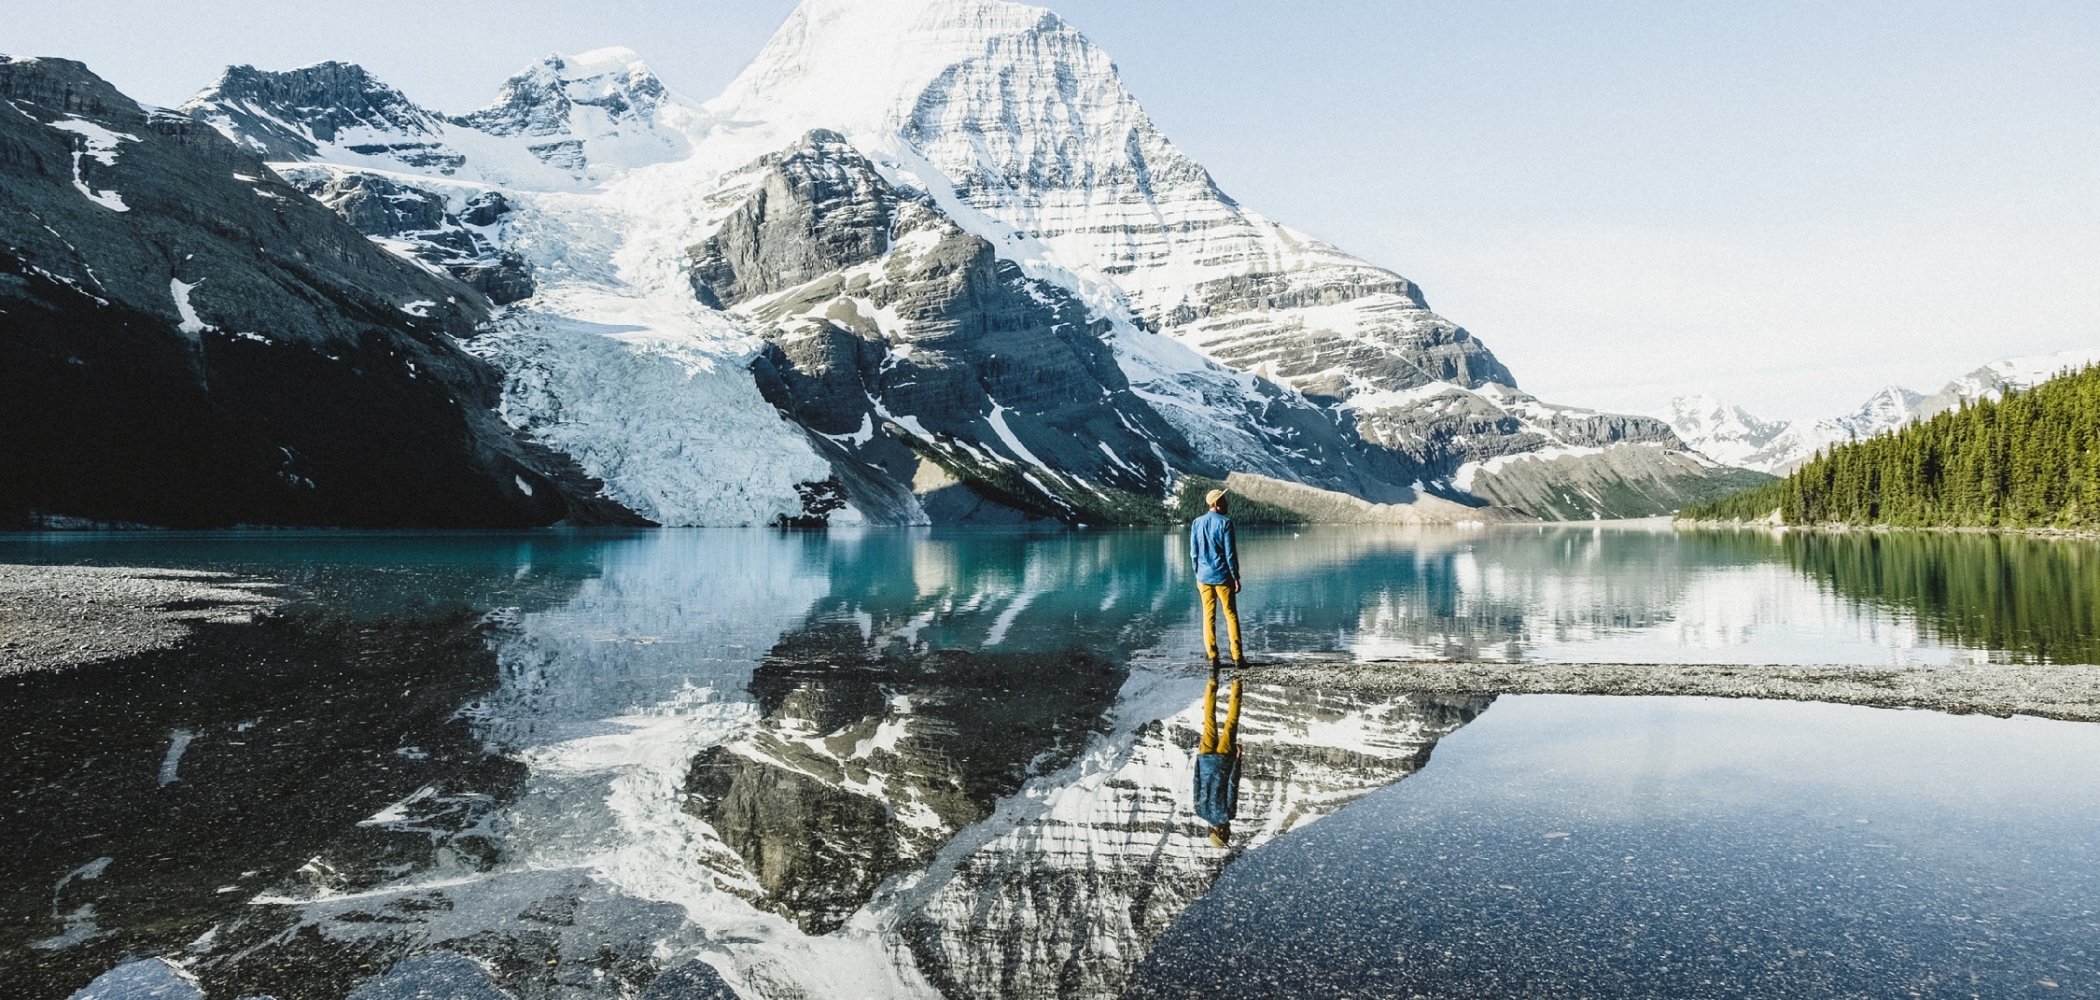 Up for an adventure? Here are the top BC adventures to add to your bucket list.